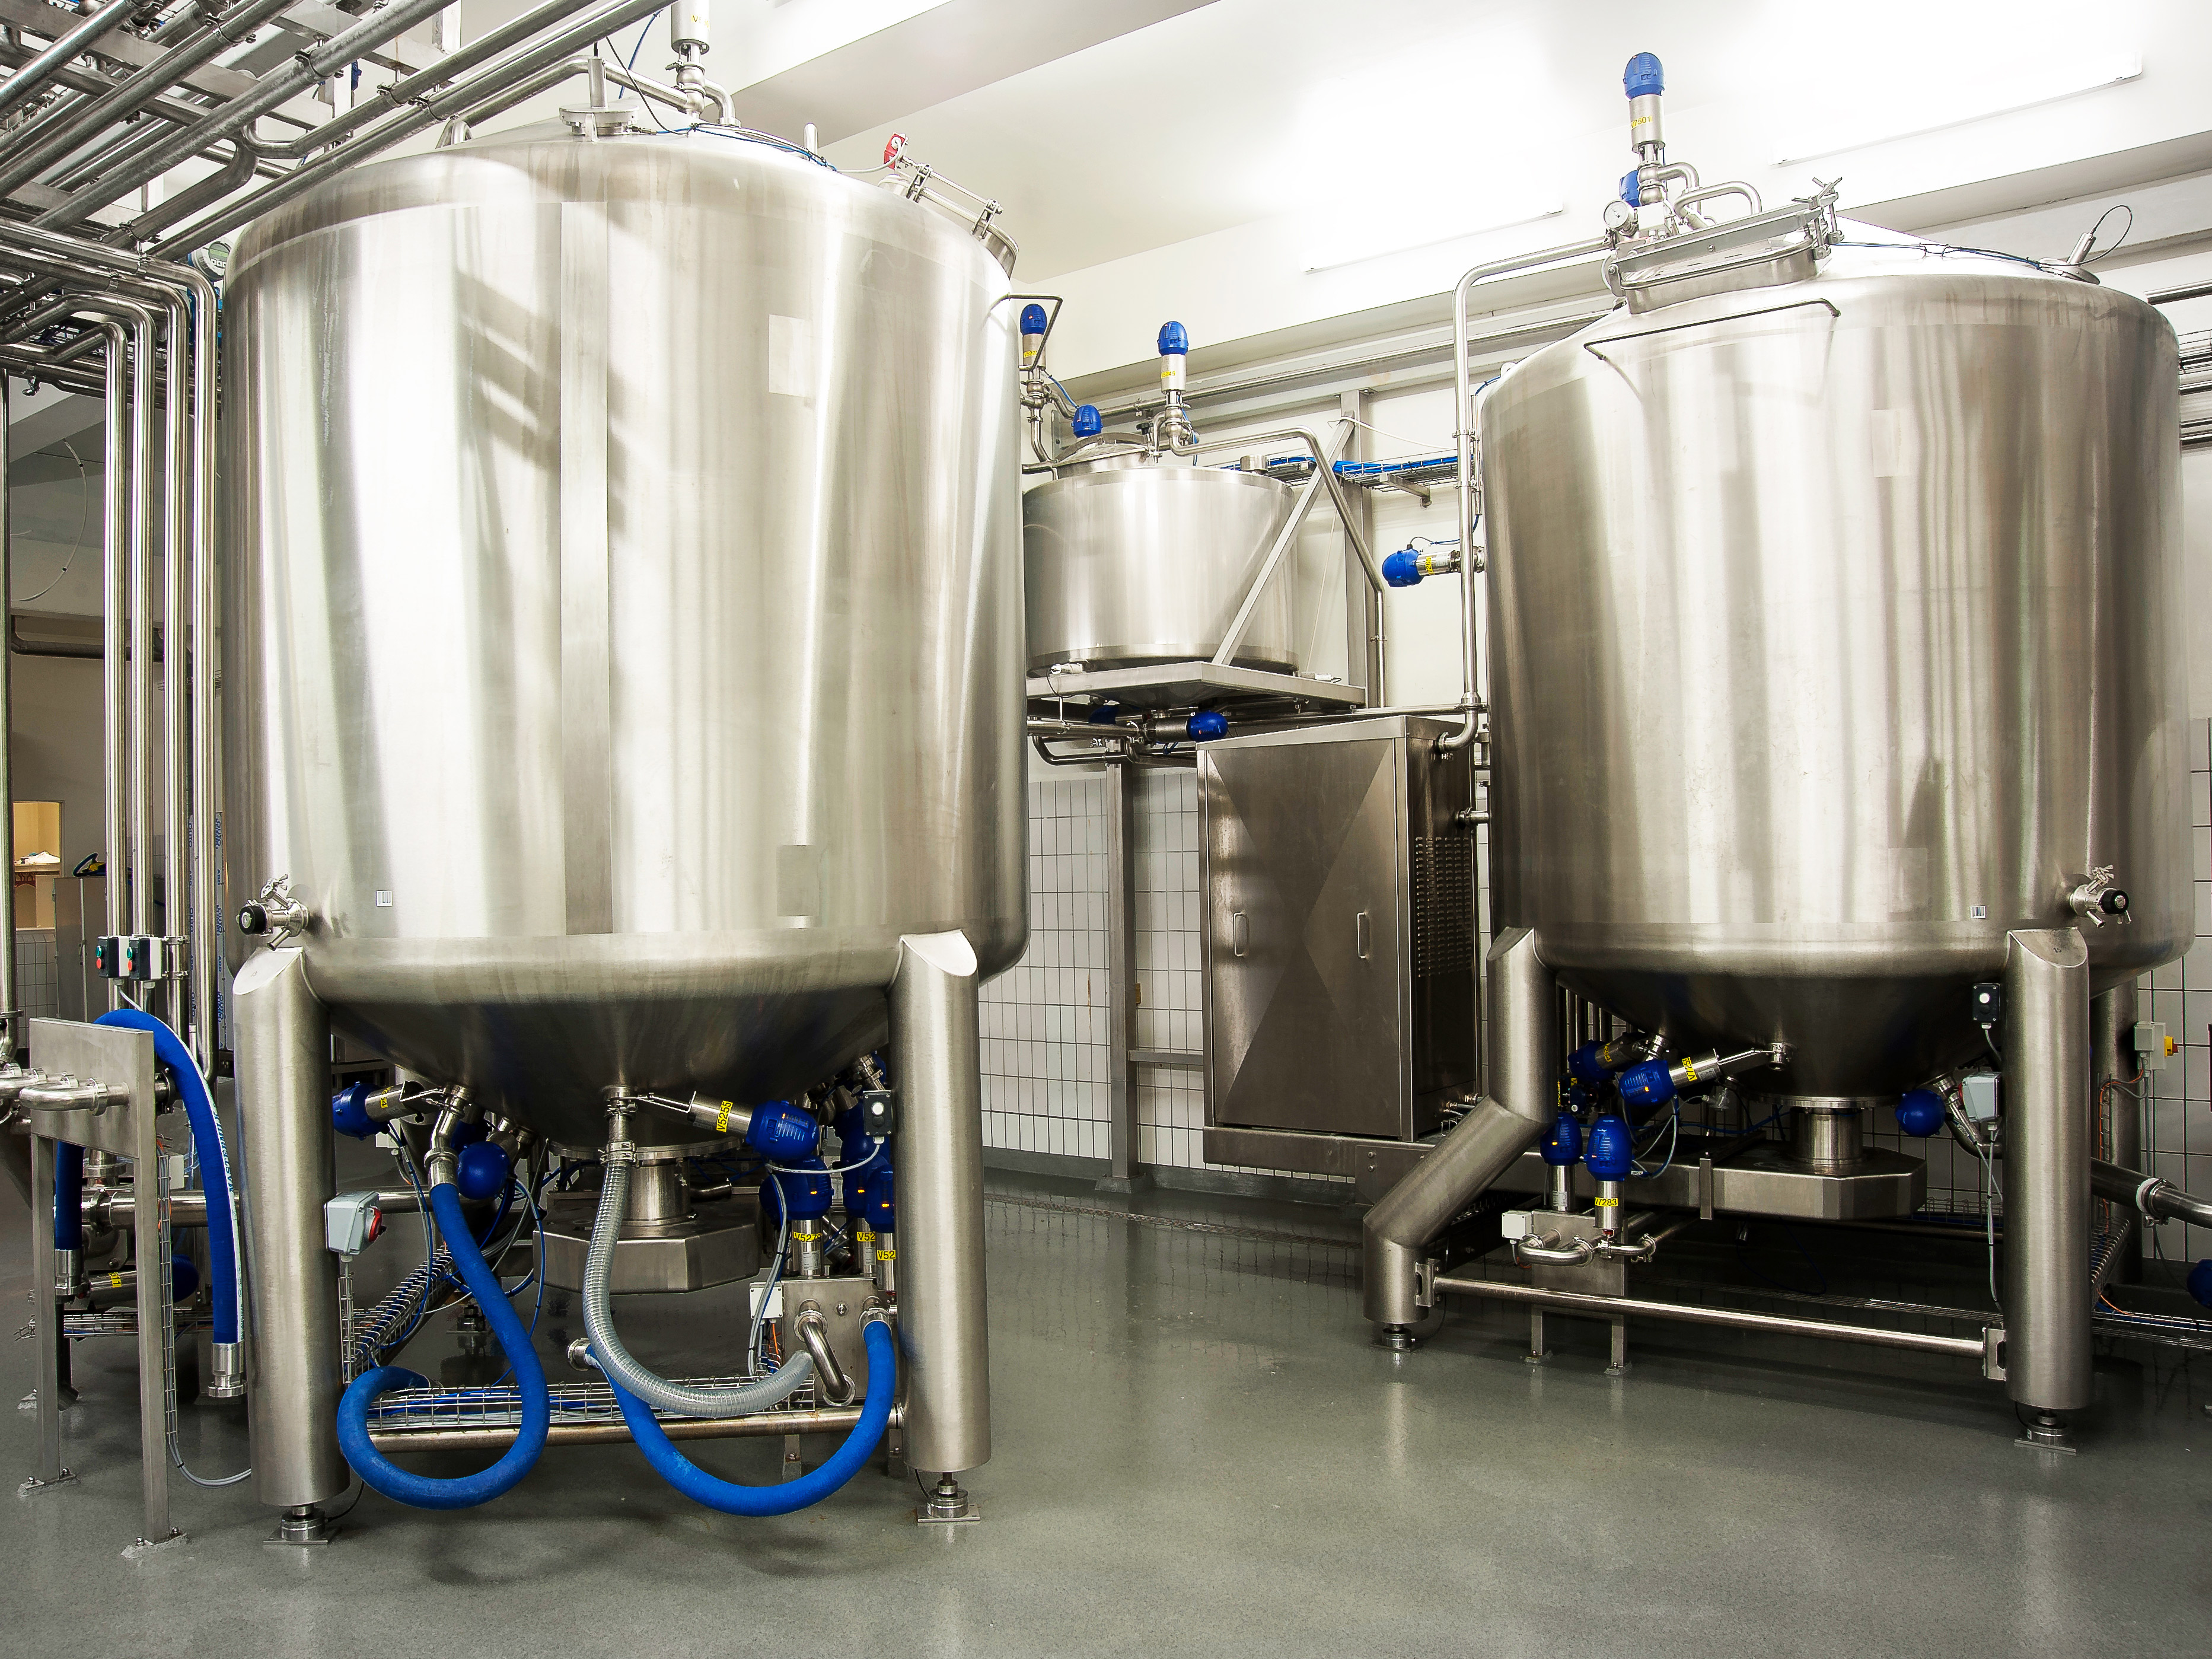 Capacitive Hygienic Load Cells Installed Under Mixers